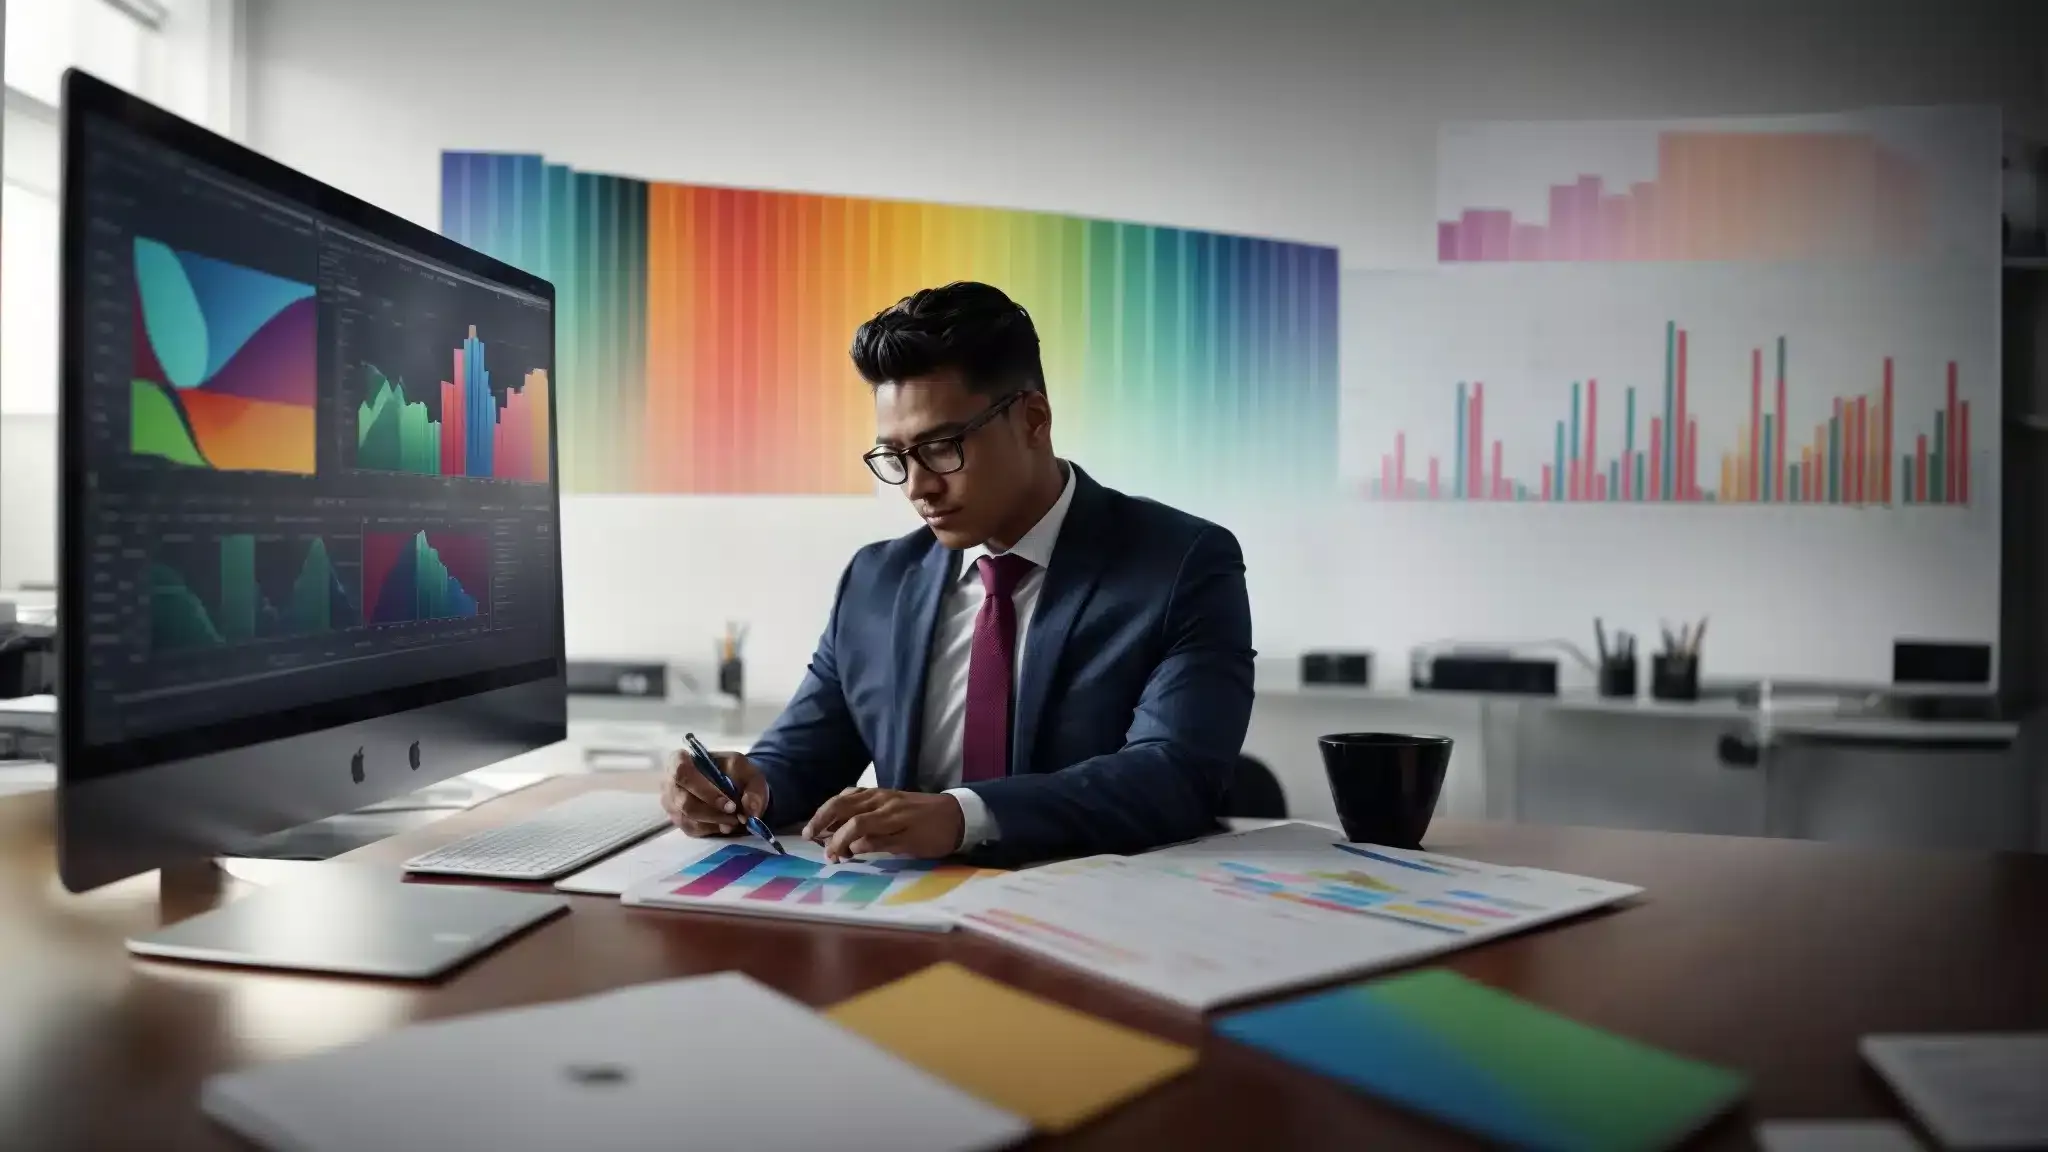 a business professional analyzing colorful graphs and charts on a computer screen in a bright, modern office.